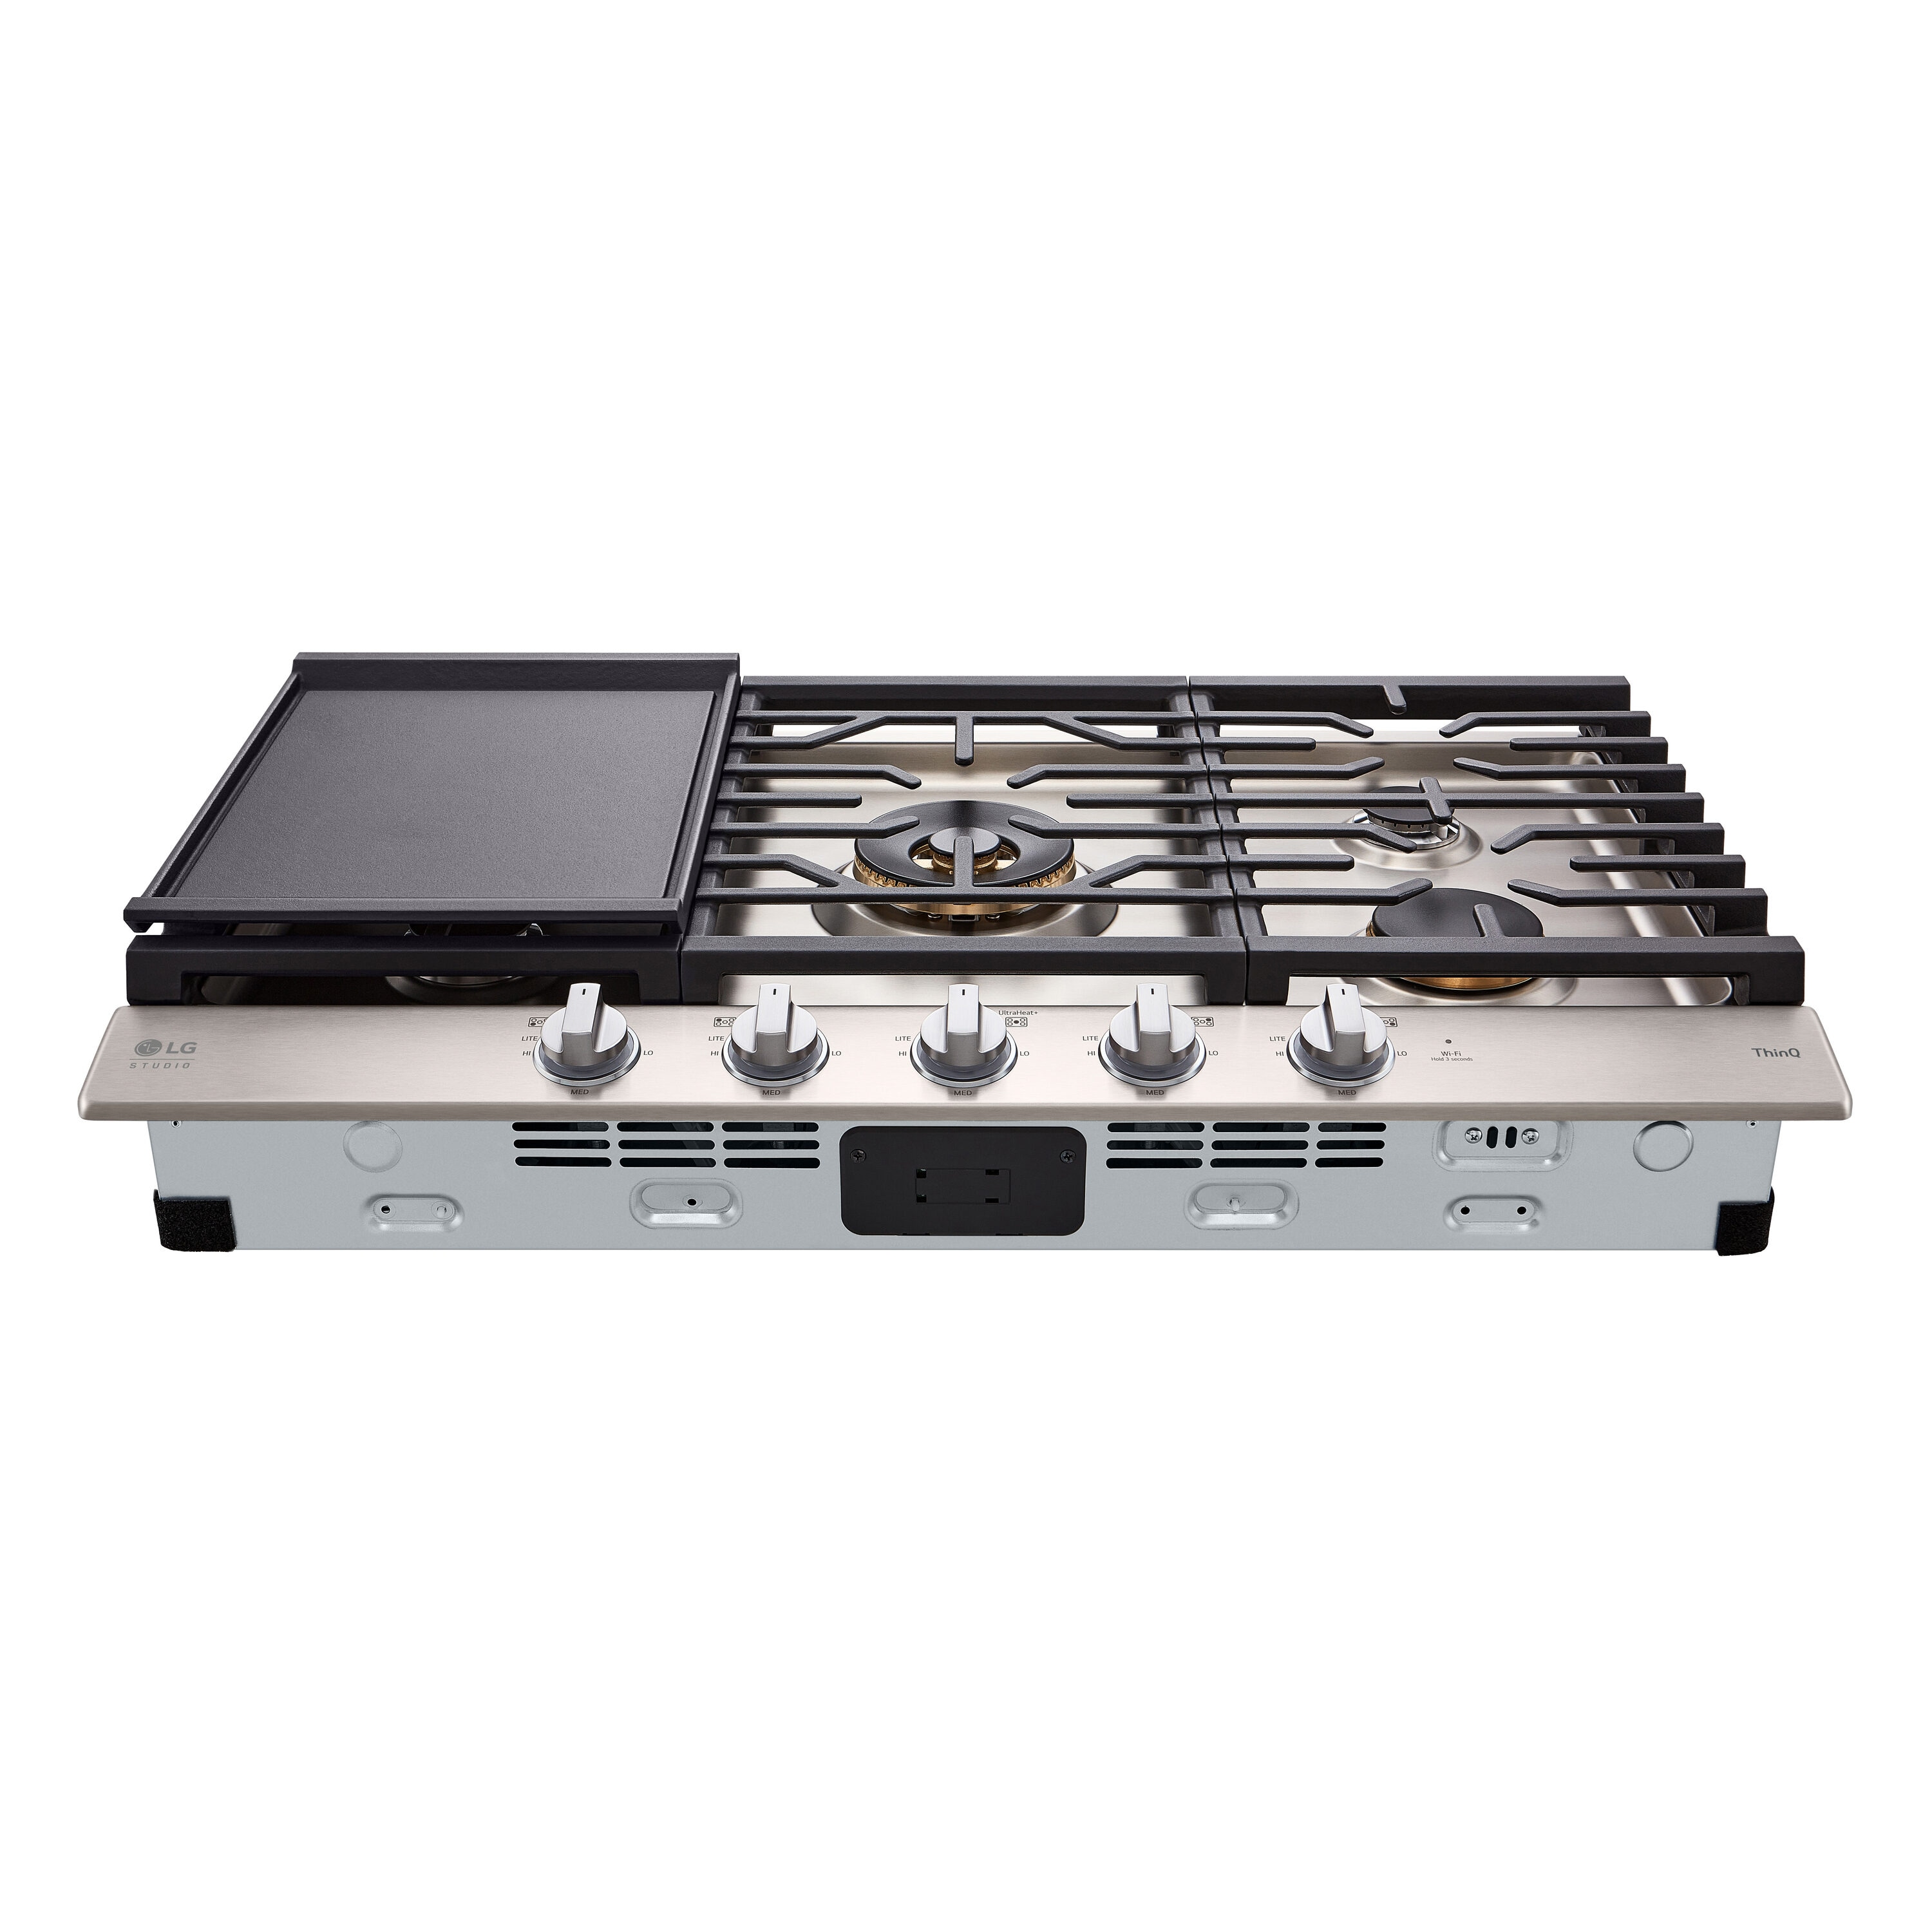 Edge to Edge Cooktop with Integrated Griddle 